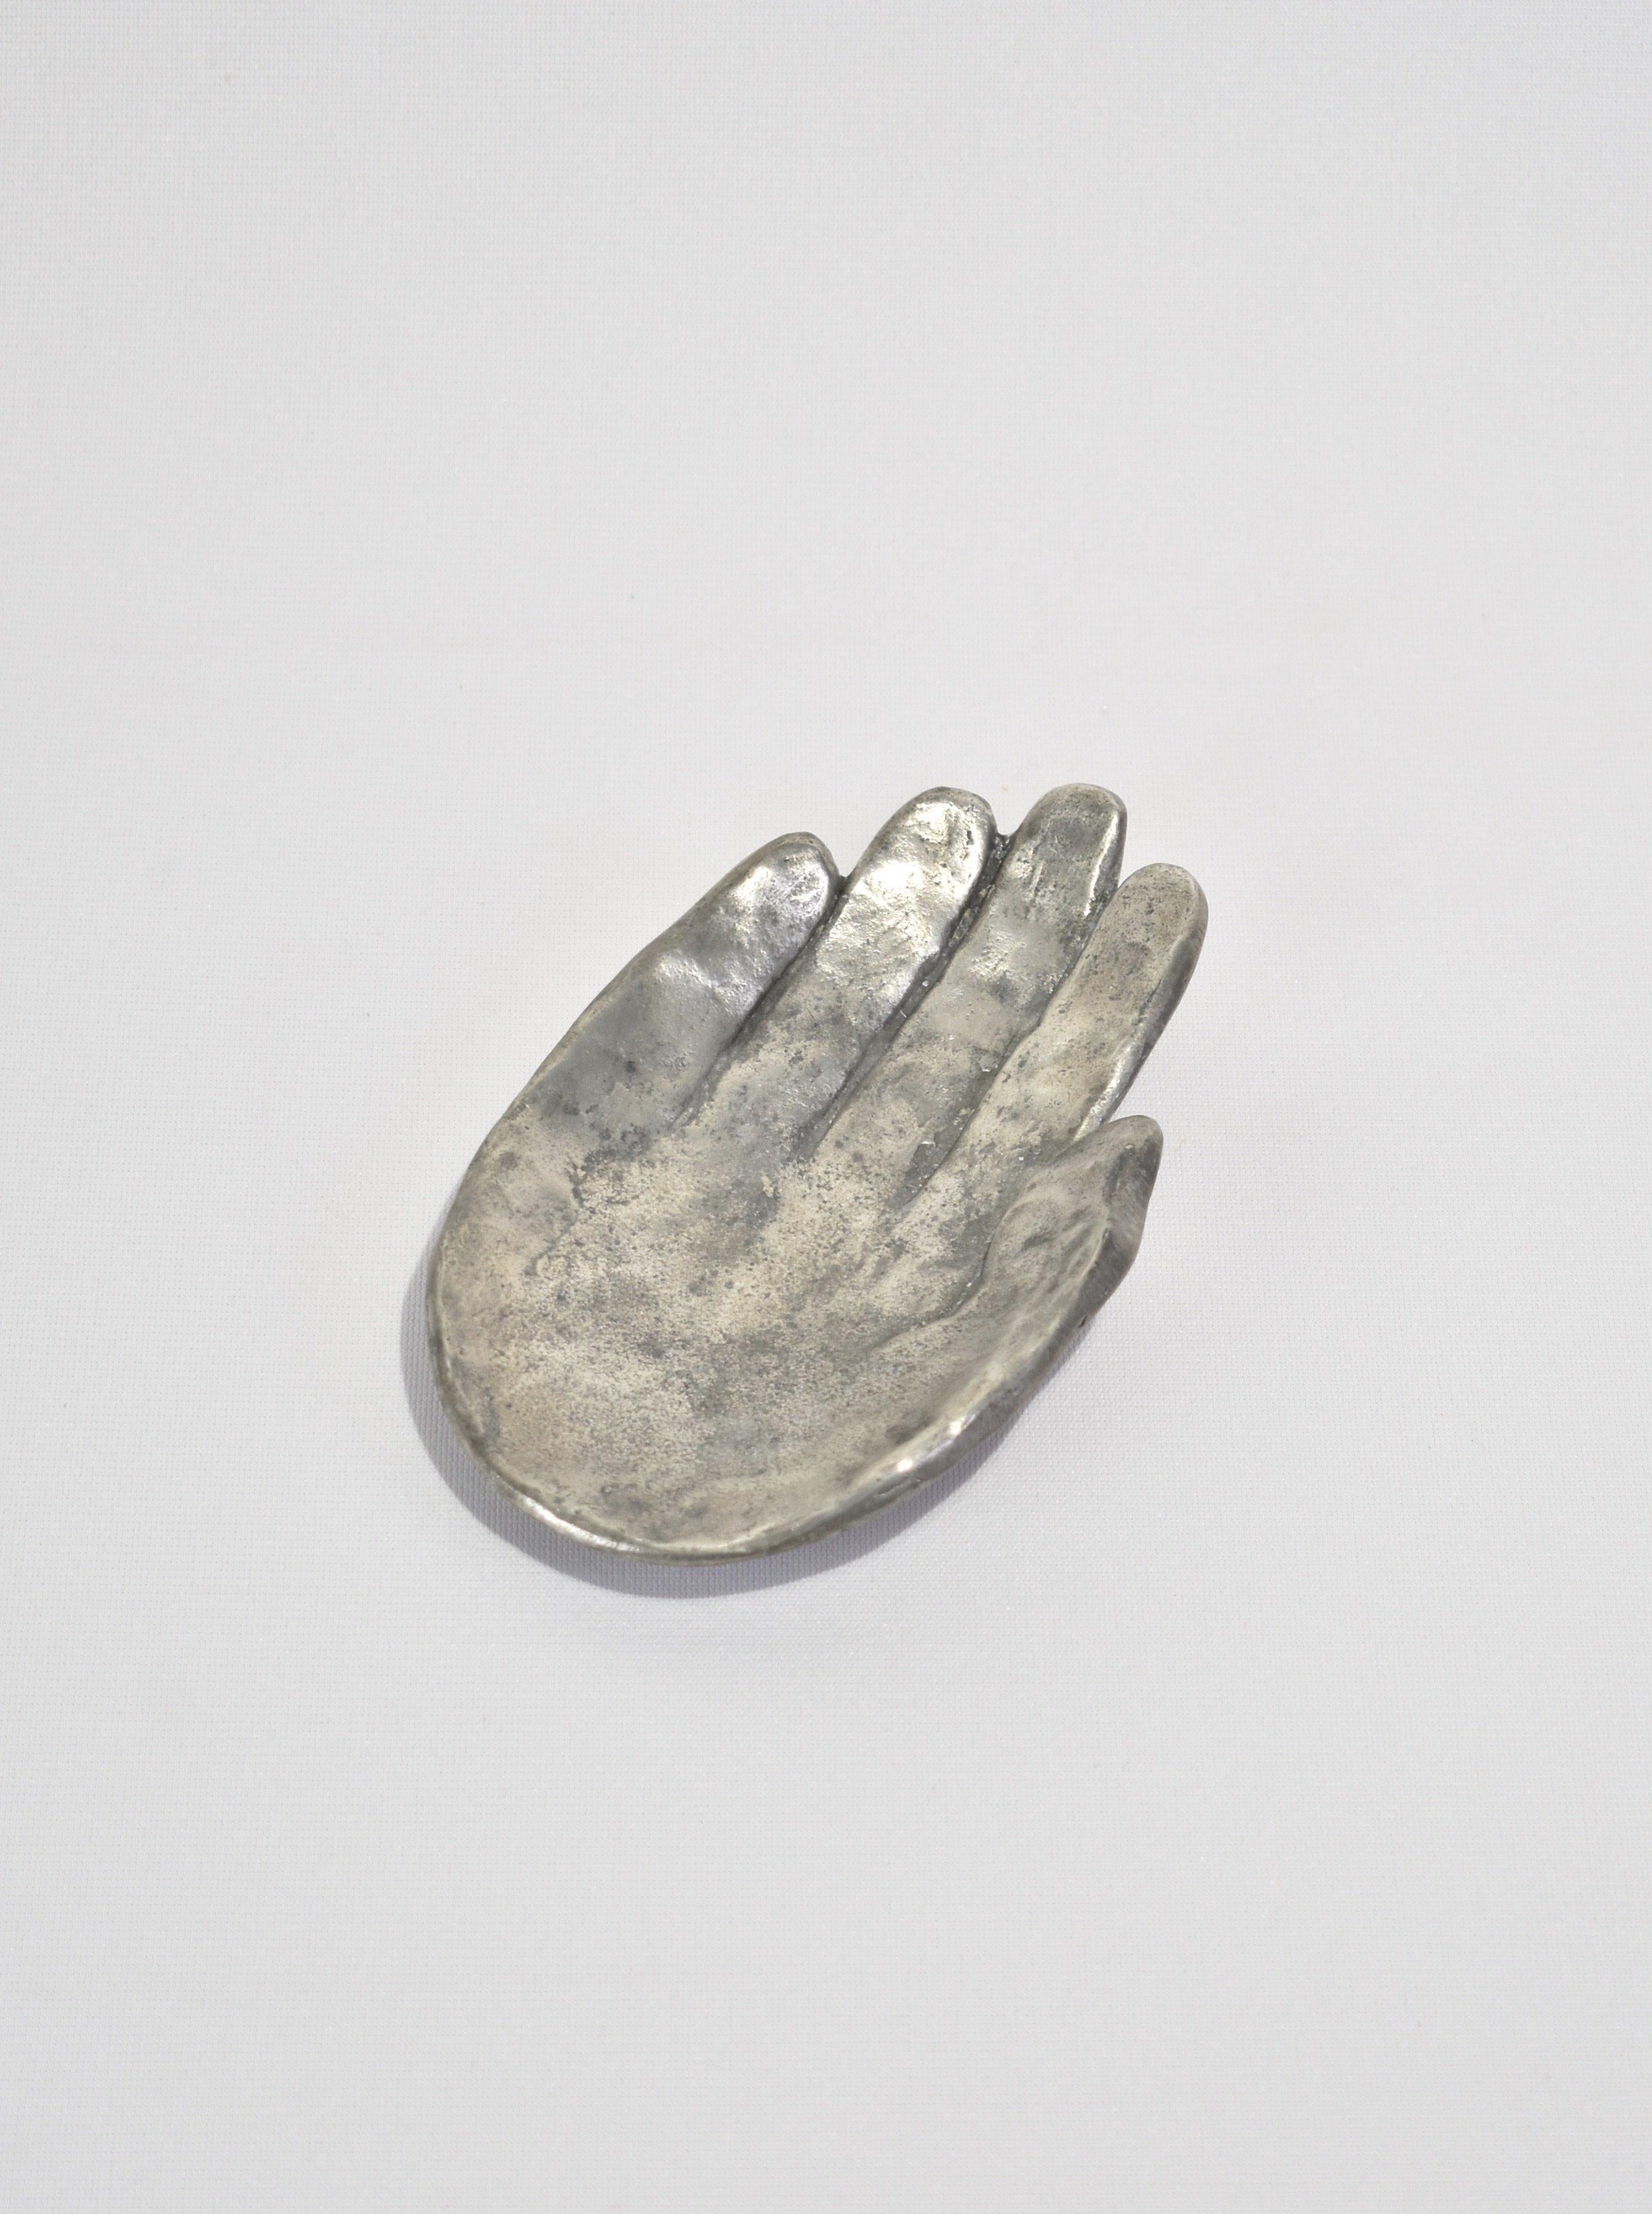 Rare, solid pewter life-size hand catchall by Patrick Meyer.